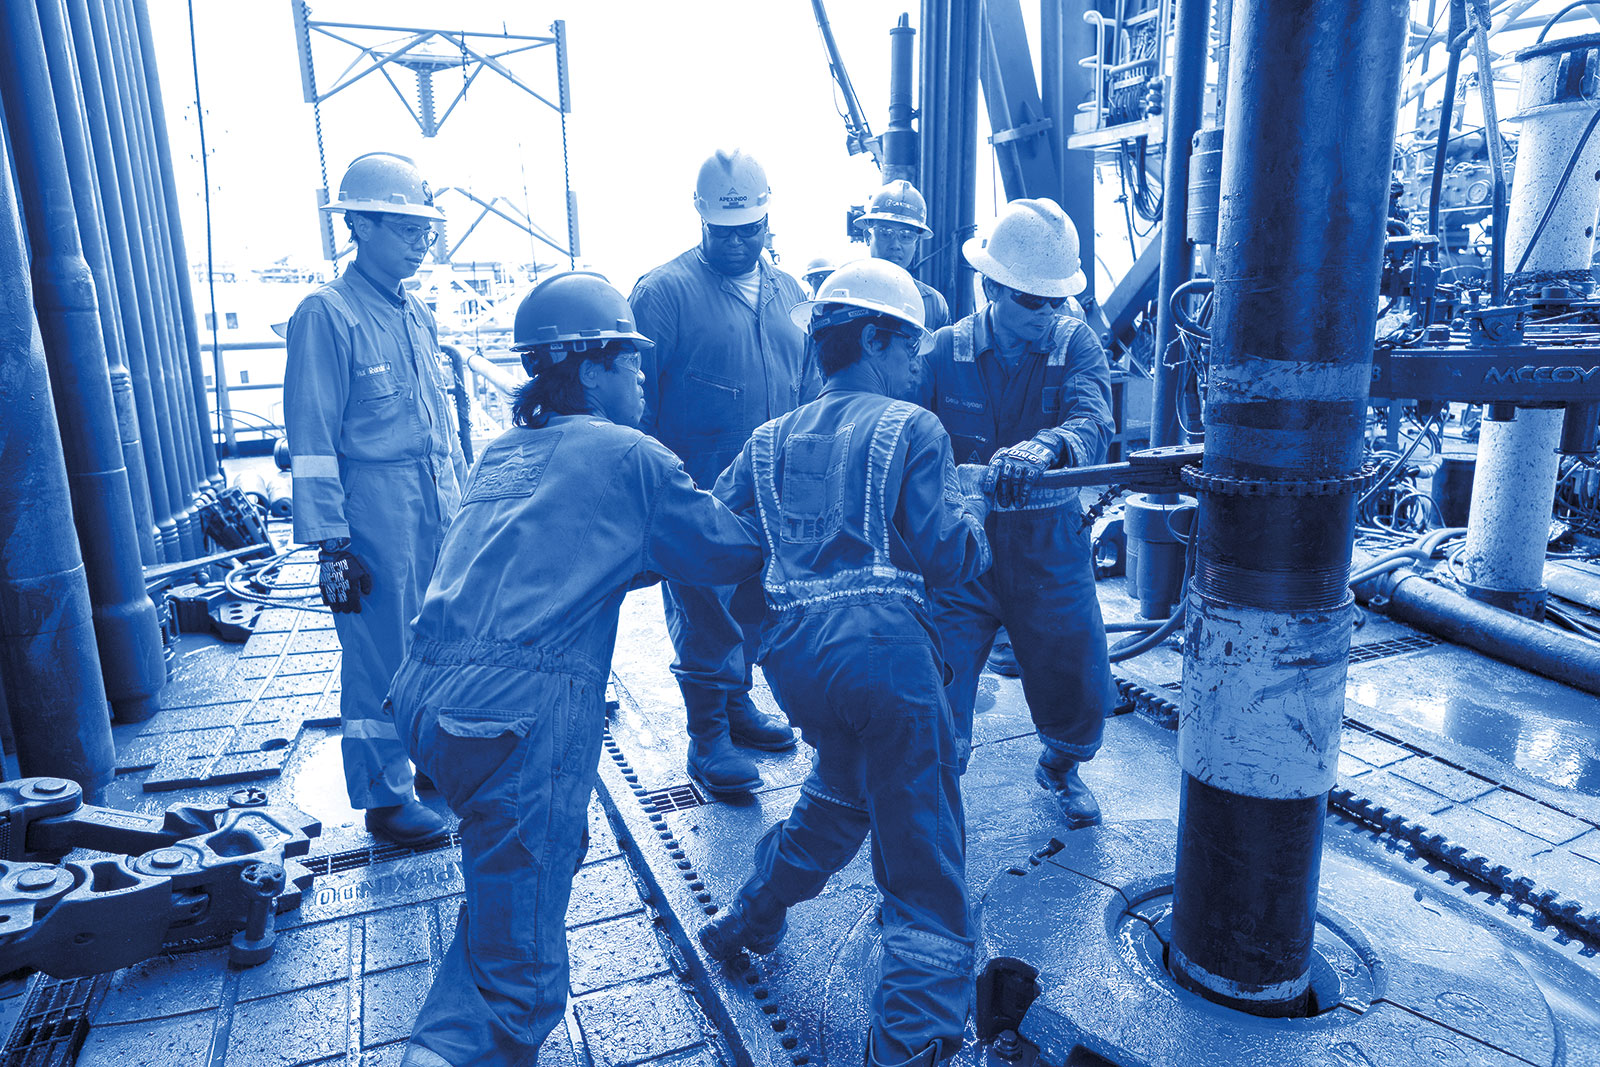 Drilling crew on a rig in Mahakam, Indonesia.